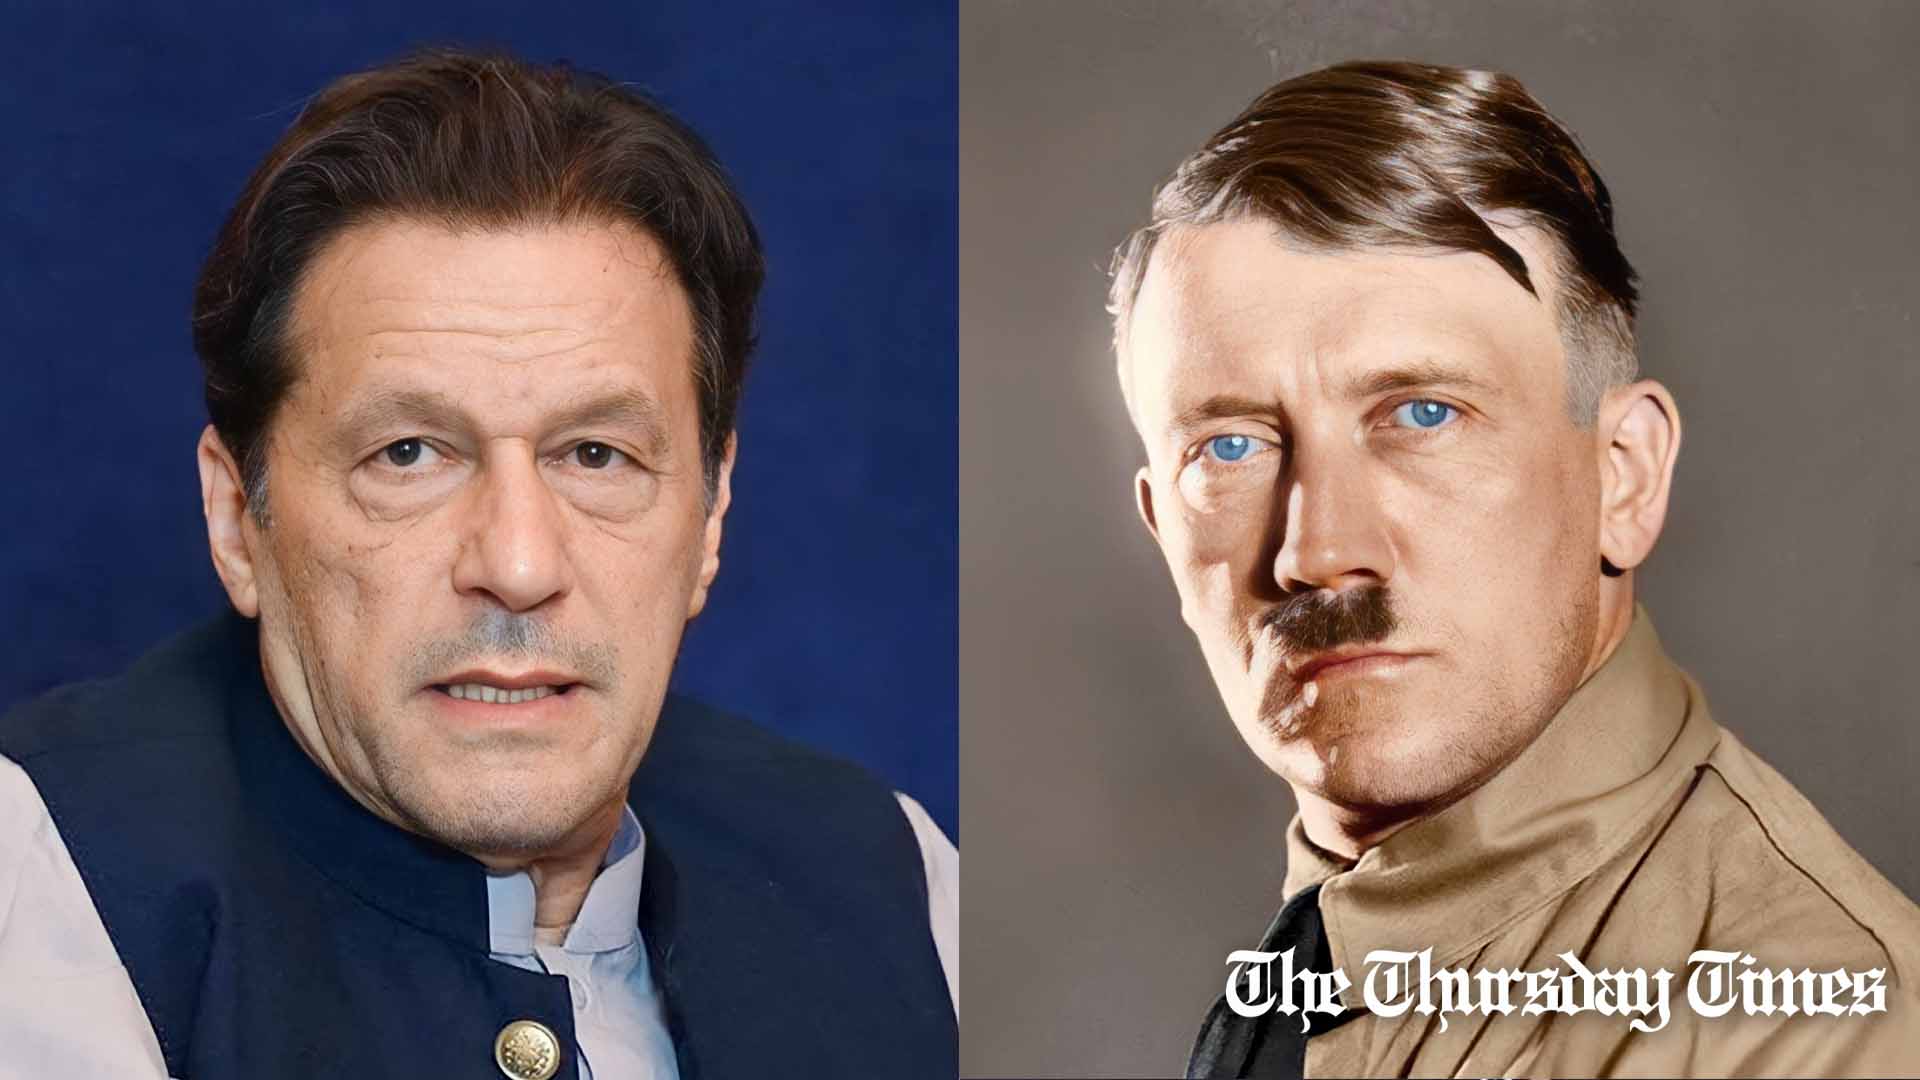 A combined file photo is shown of PTI chairman Imran Khan (L) and former German dictator Adolf Hitler (R). — FILE/THE THURSDAY TIMES